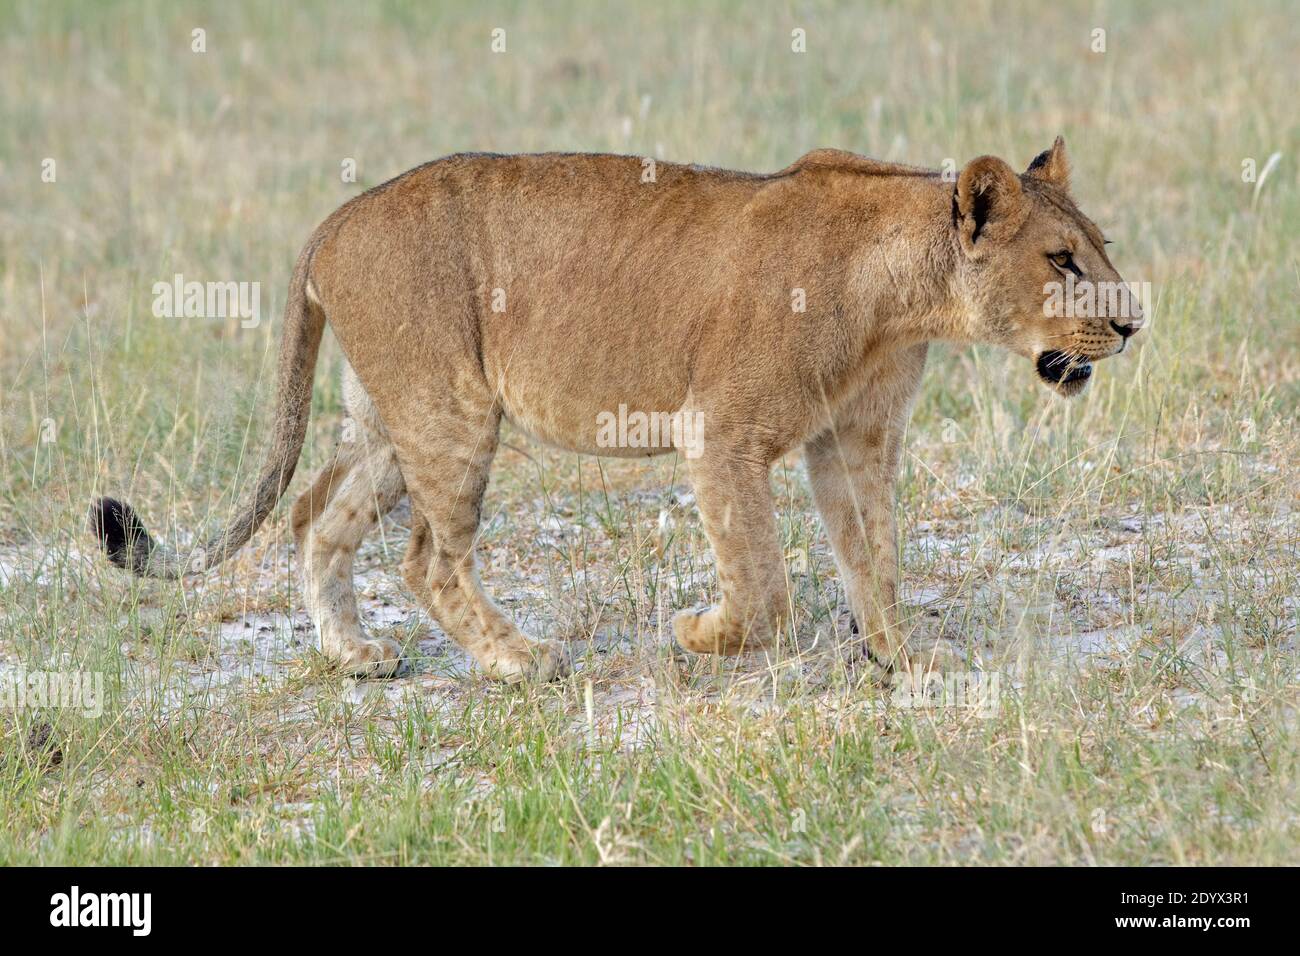 African Lioness (Panthera leo). Profile, side view, walking. Recently consumed and eaten from a kill and now retiring seeking cover and will digest. Stock Photo